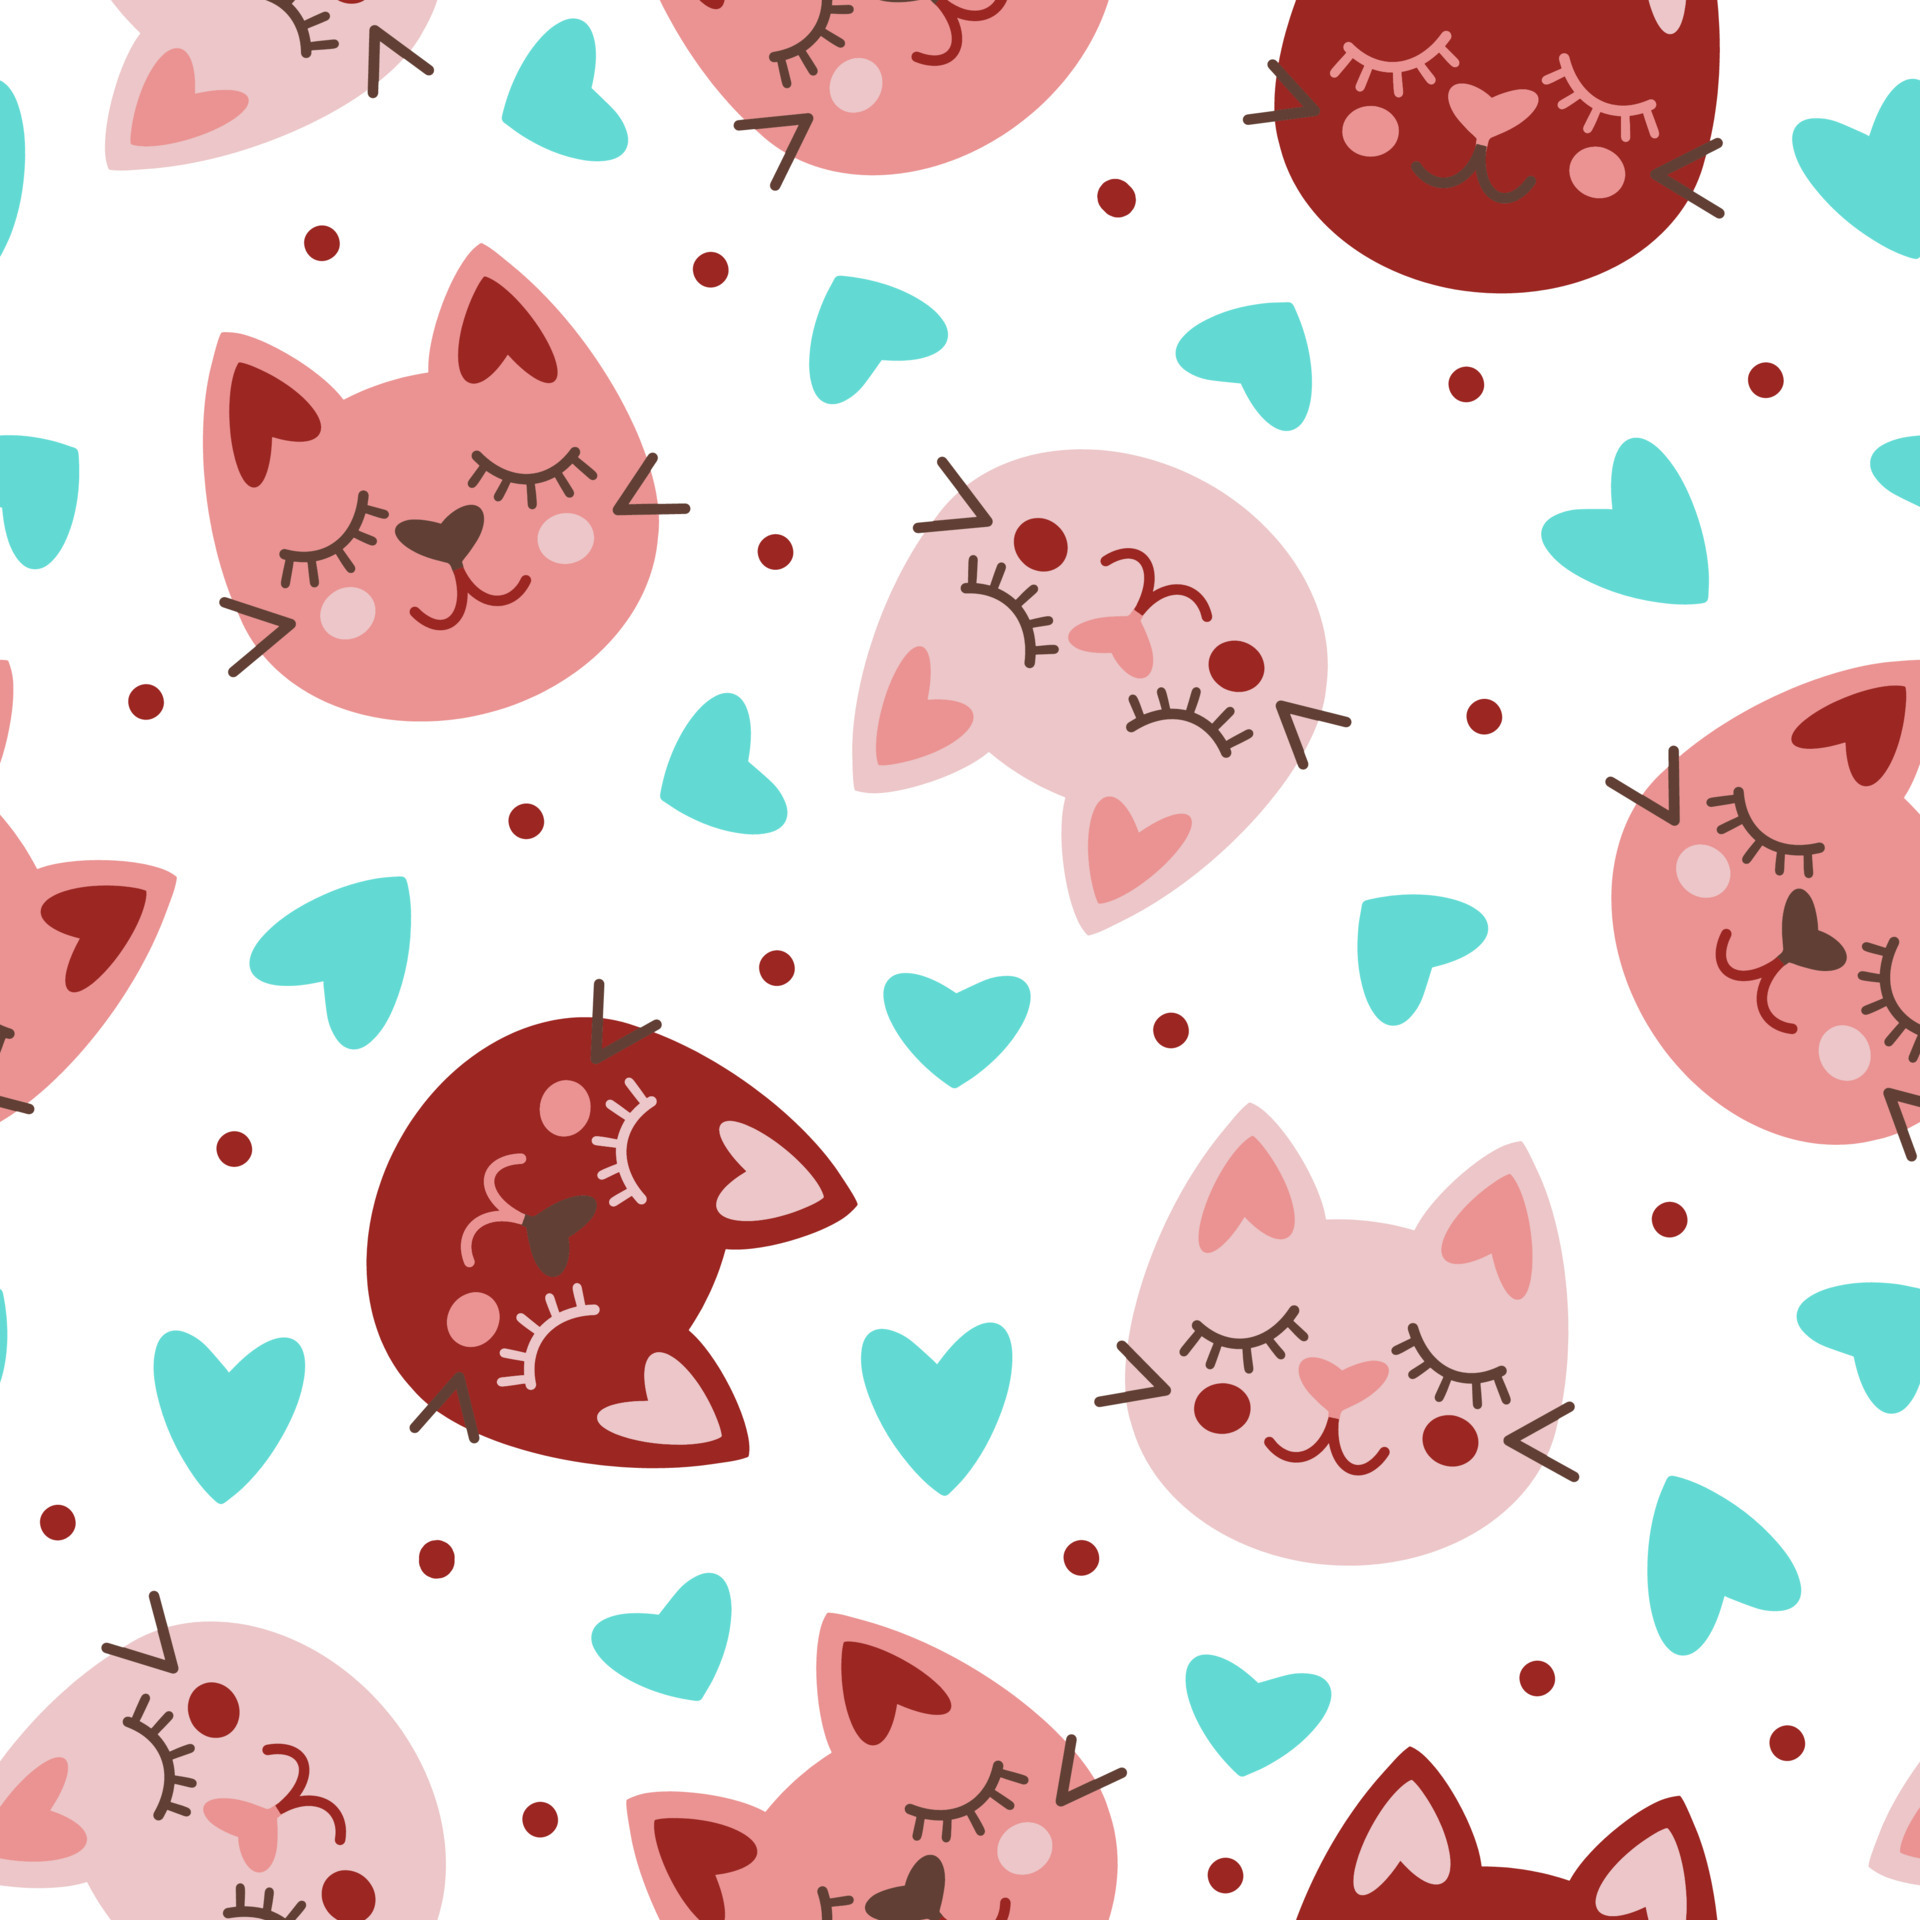 Cute cat faces seamless vector pattern. Hand drawn flat cartoon background. Beautiful smiling kittens with hearts. Funny pets, valentine's day concept. Seasonal , childrens illustration